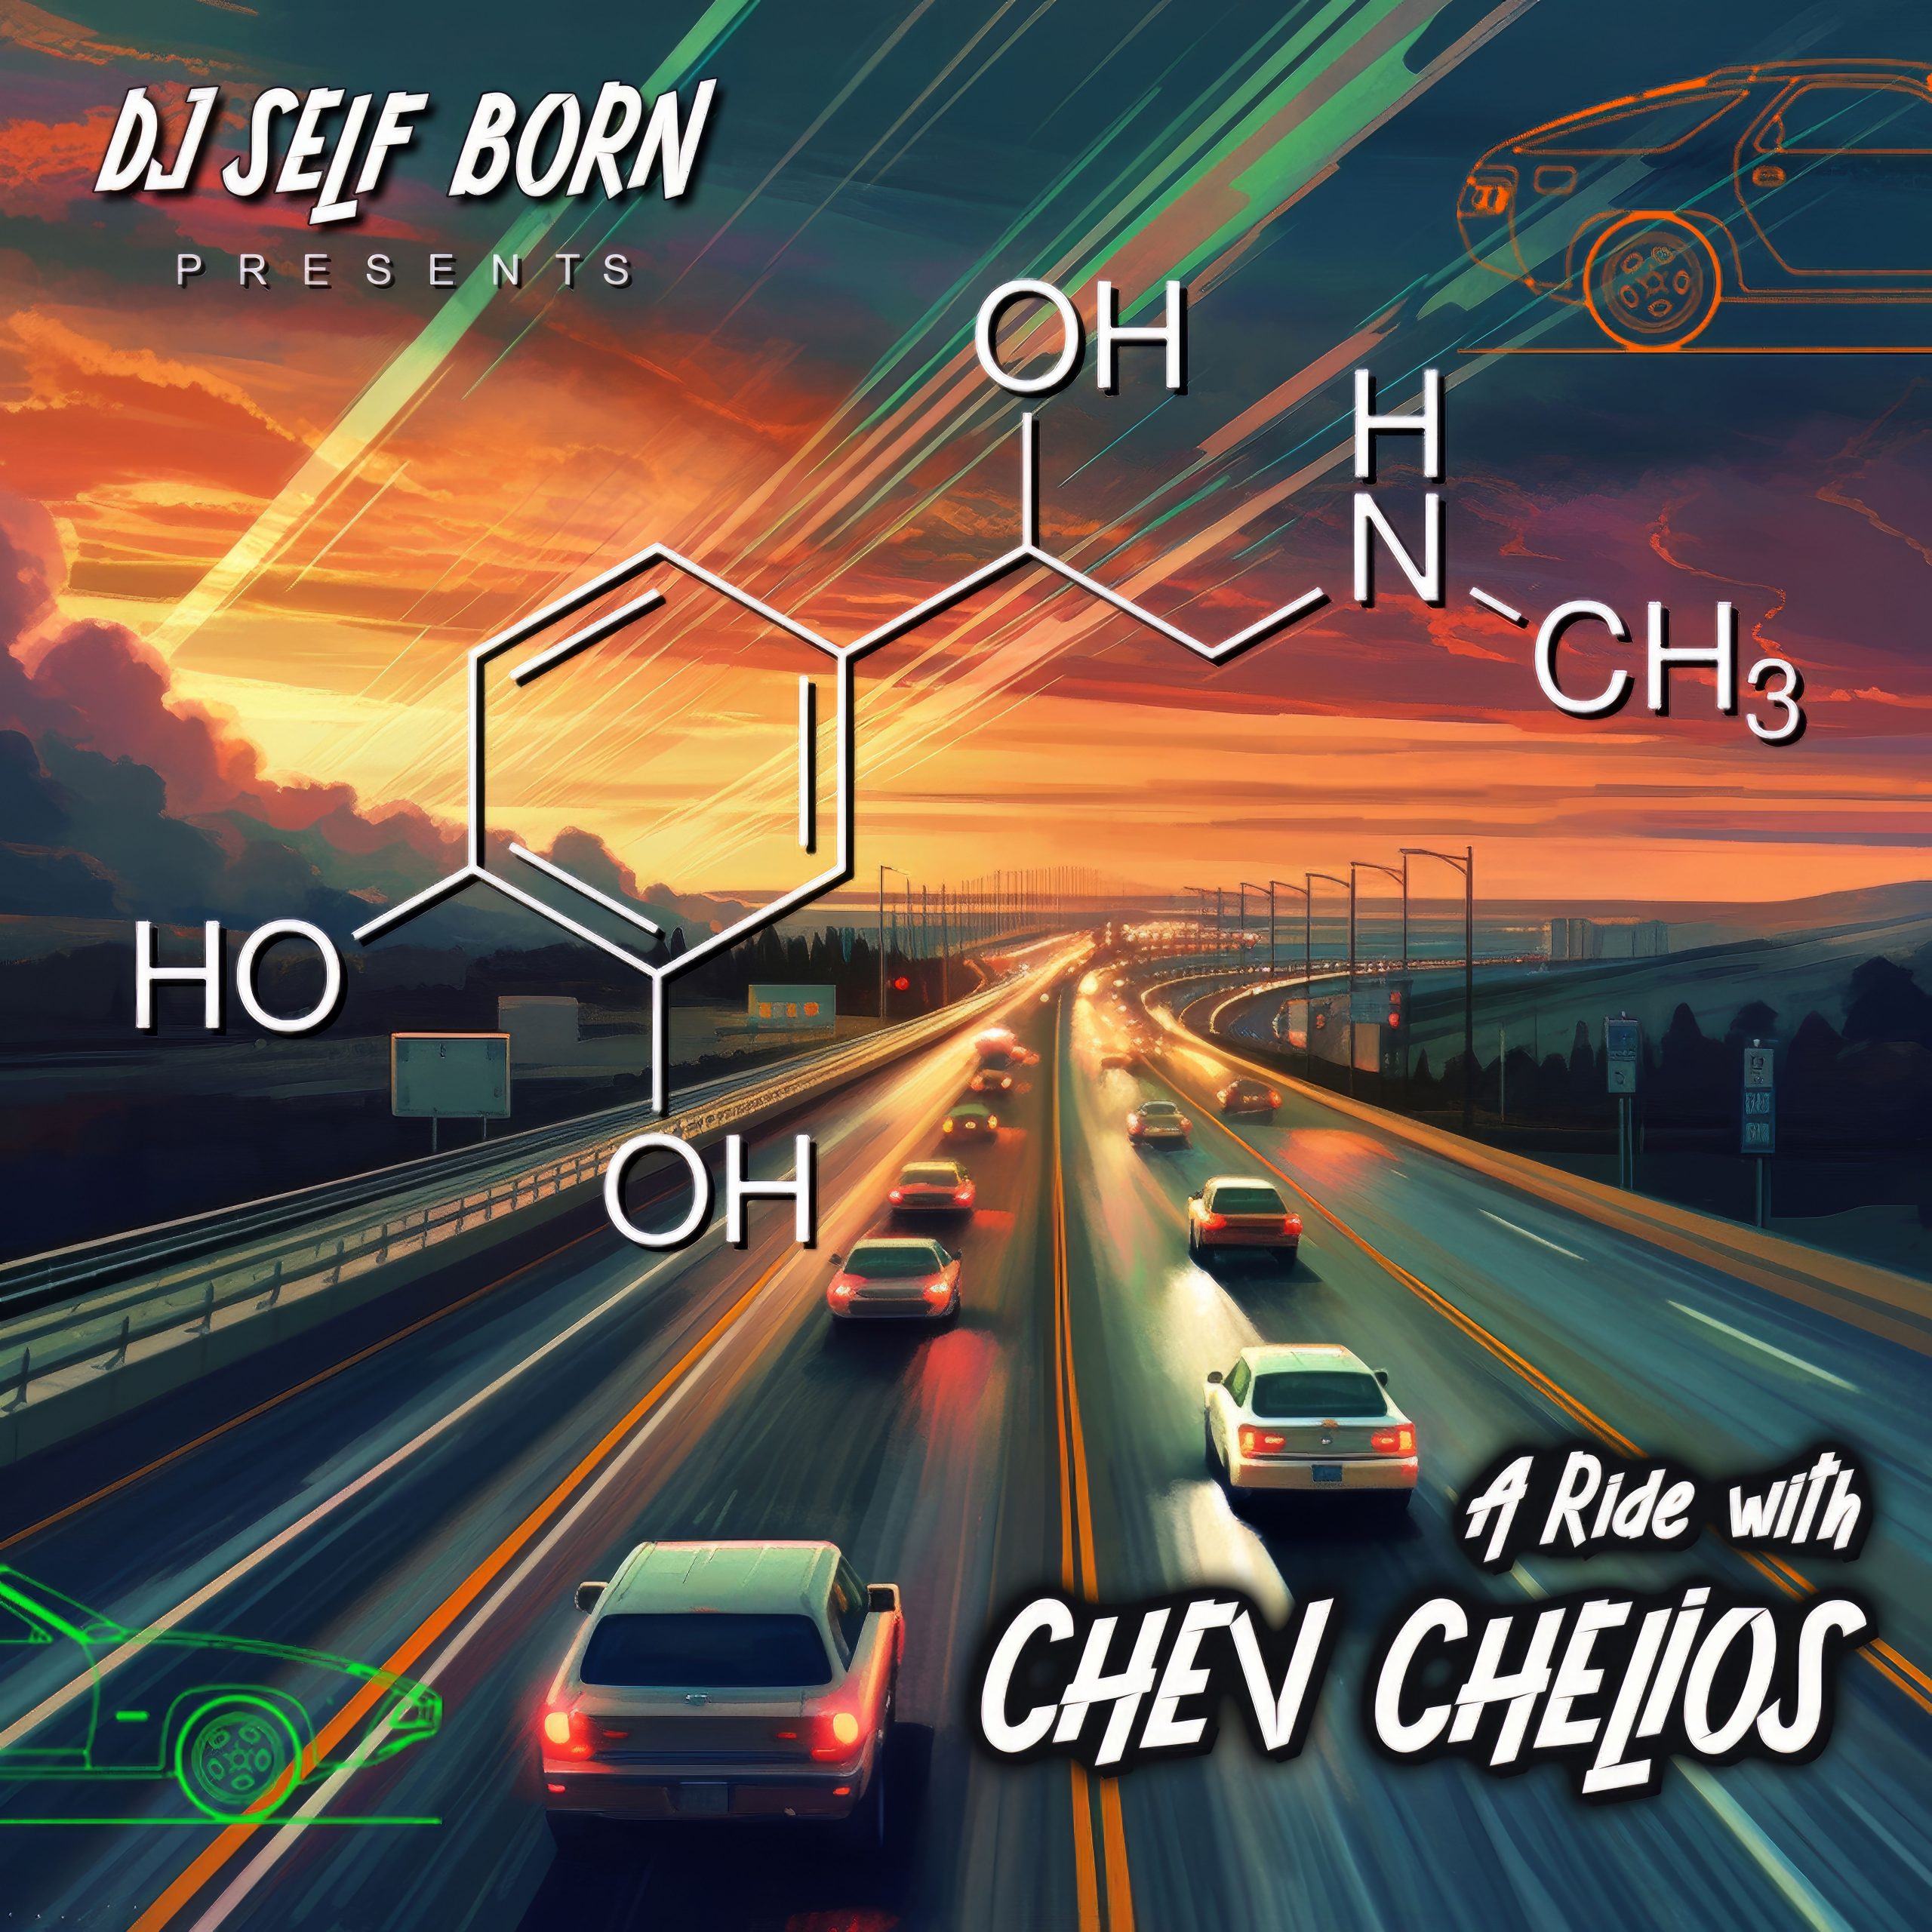 Sonic Fusion at Its Finest: DJ Self Born’s ‘A Ride With Chev Chelios’ Takes You on a thrilling Journey.